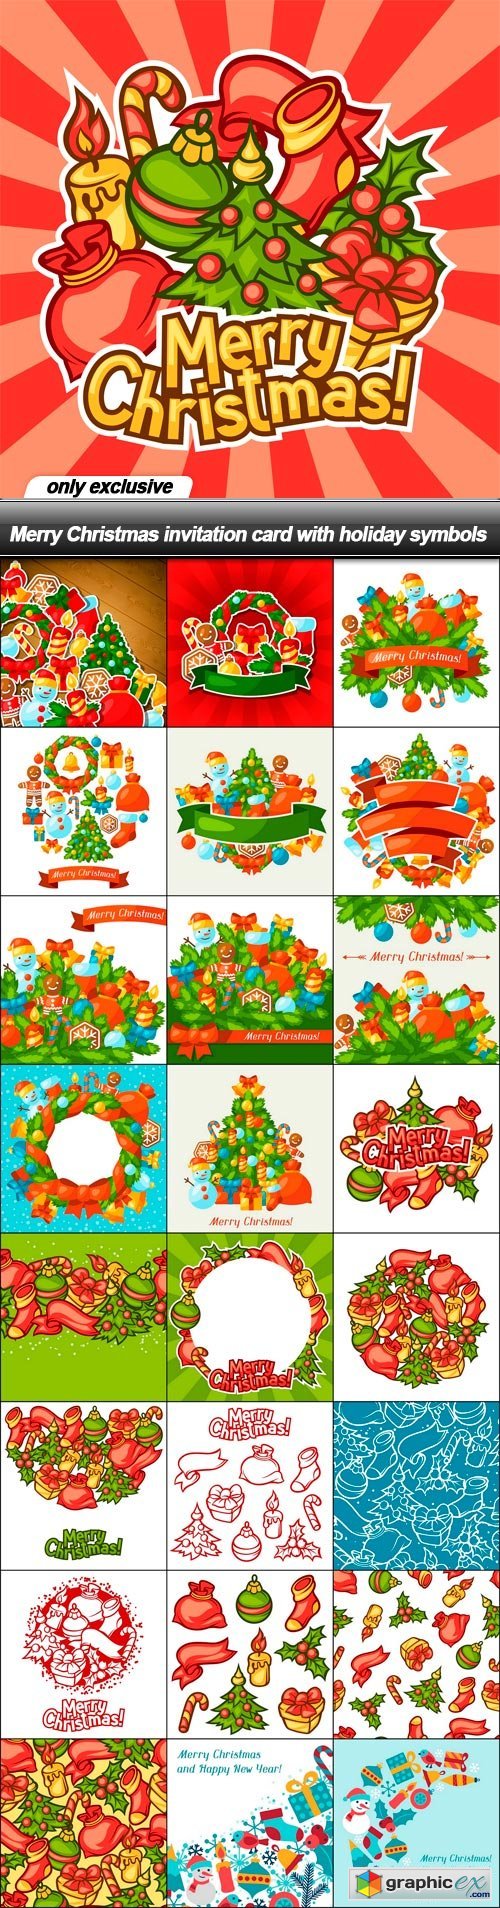 Merry Christmas invitation card with holiday symbols - 25 EPS